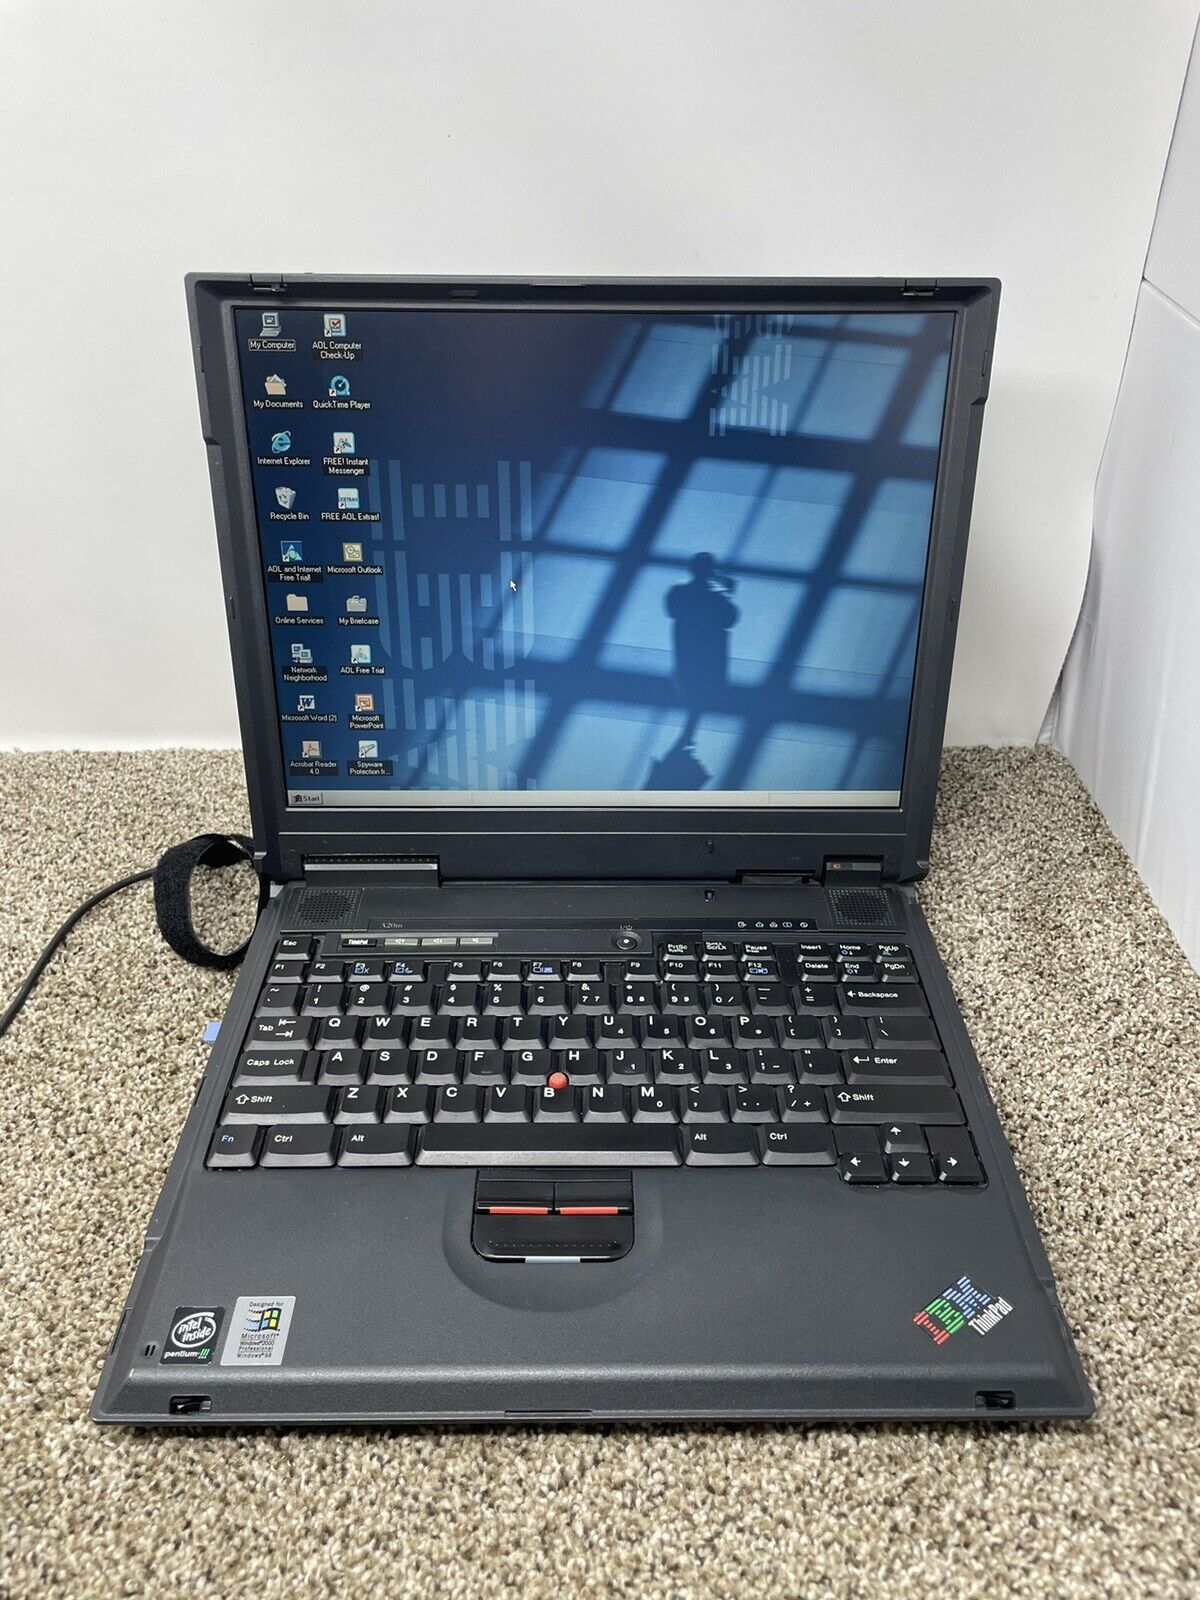 Vintage IBM Thinkpad A20m Laptop Windows 98 PARTIALLY TESTED AS IS